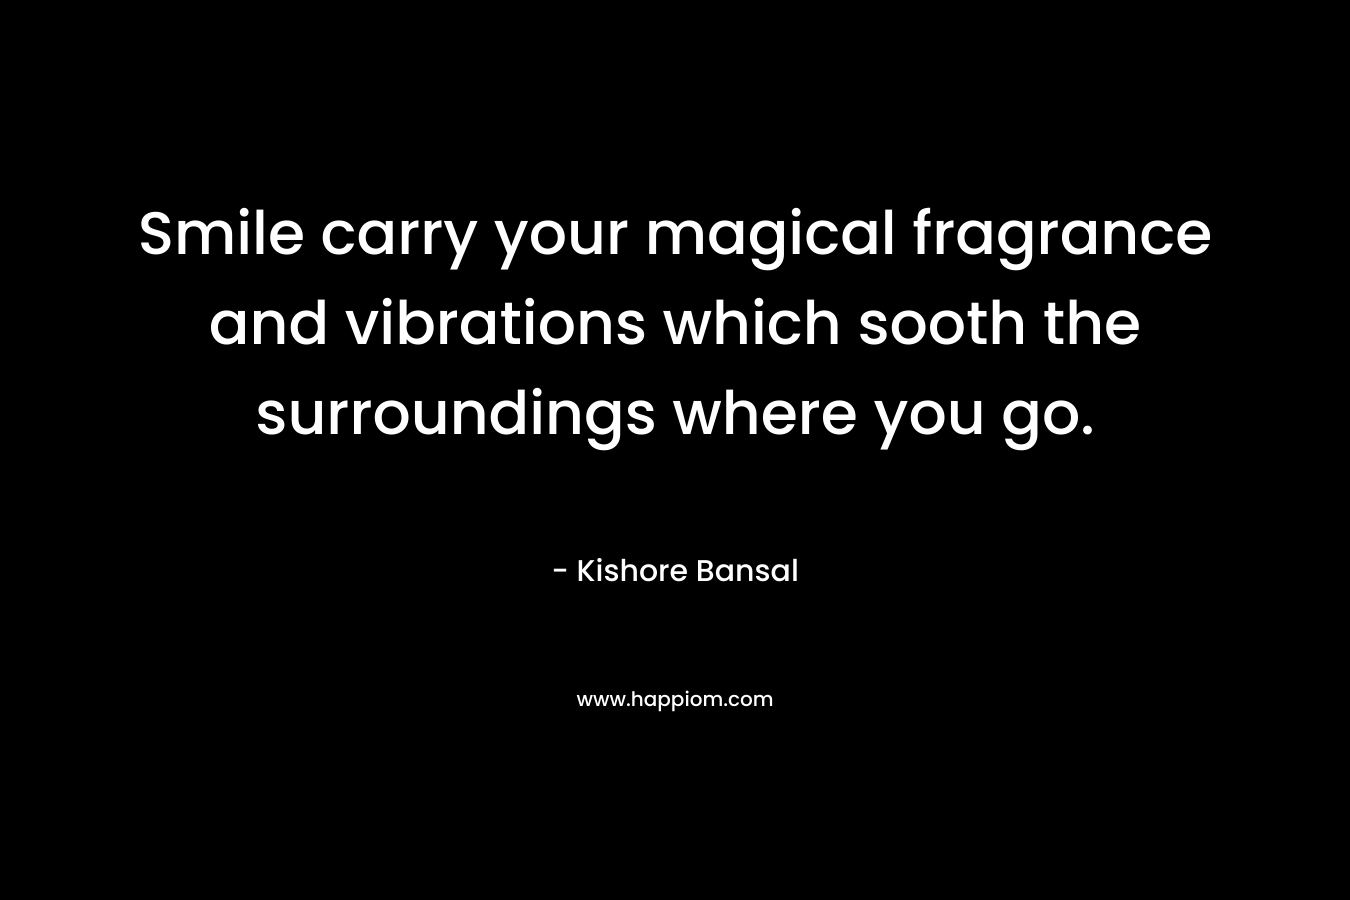 Smile carry your magical fragrance and vibrations which sooth the surroundings where you go.